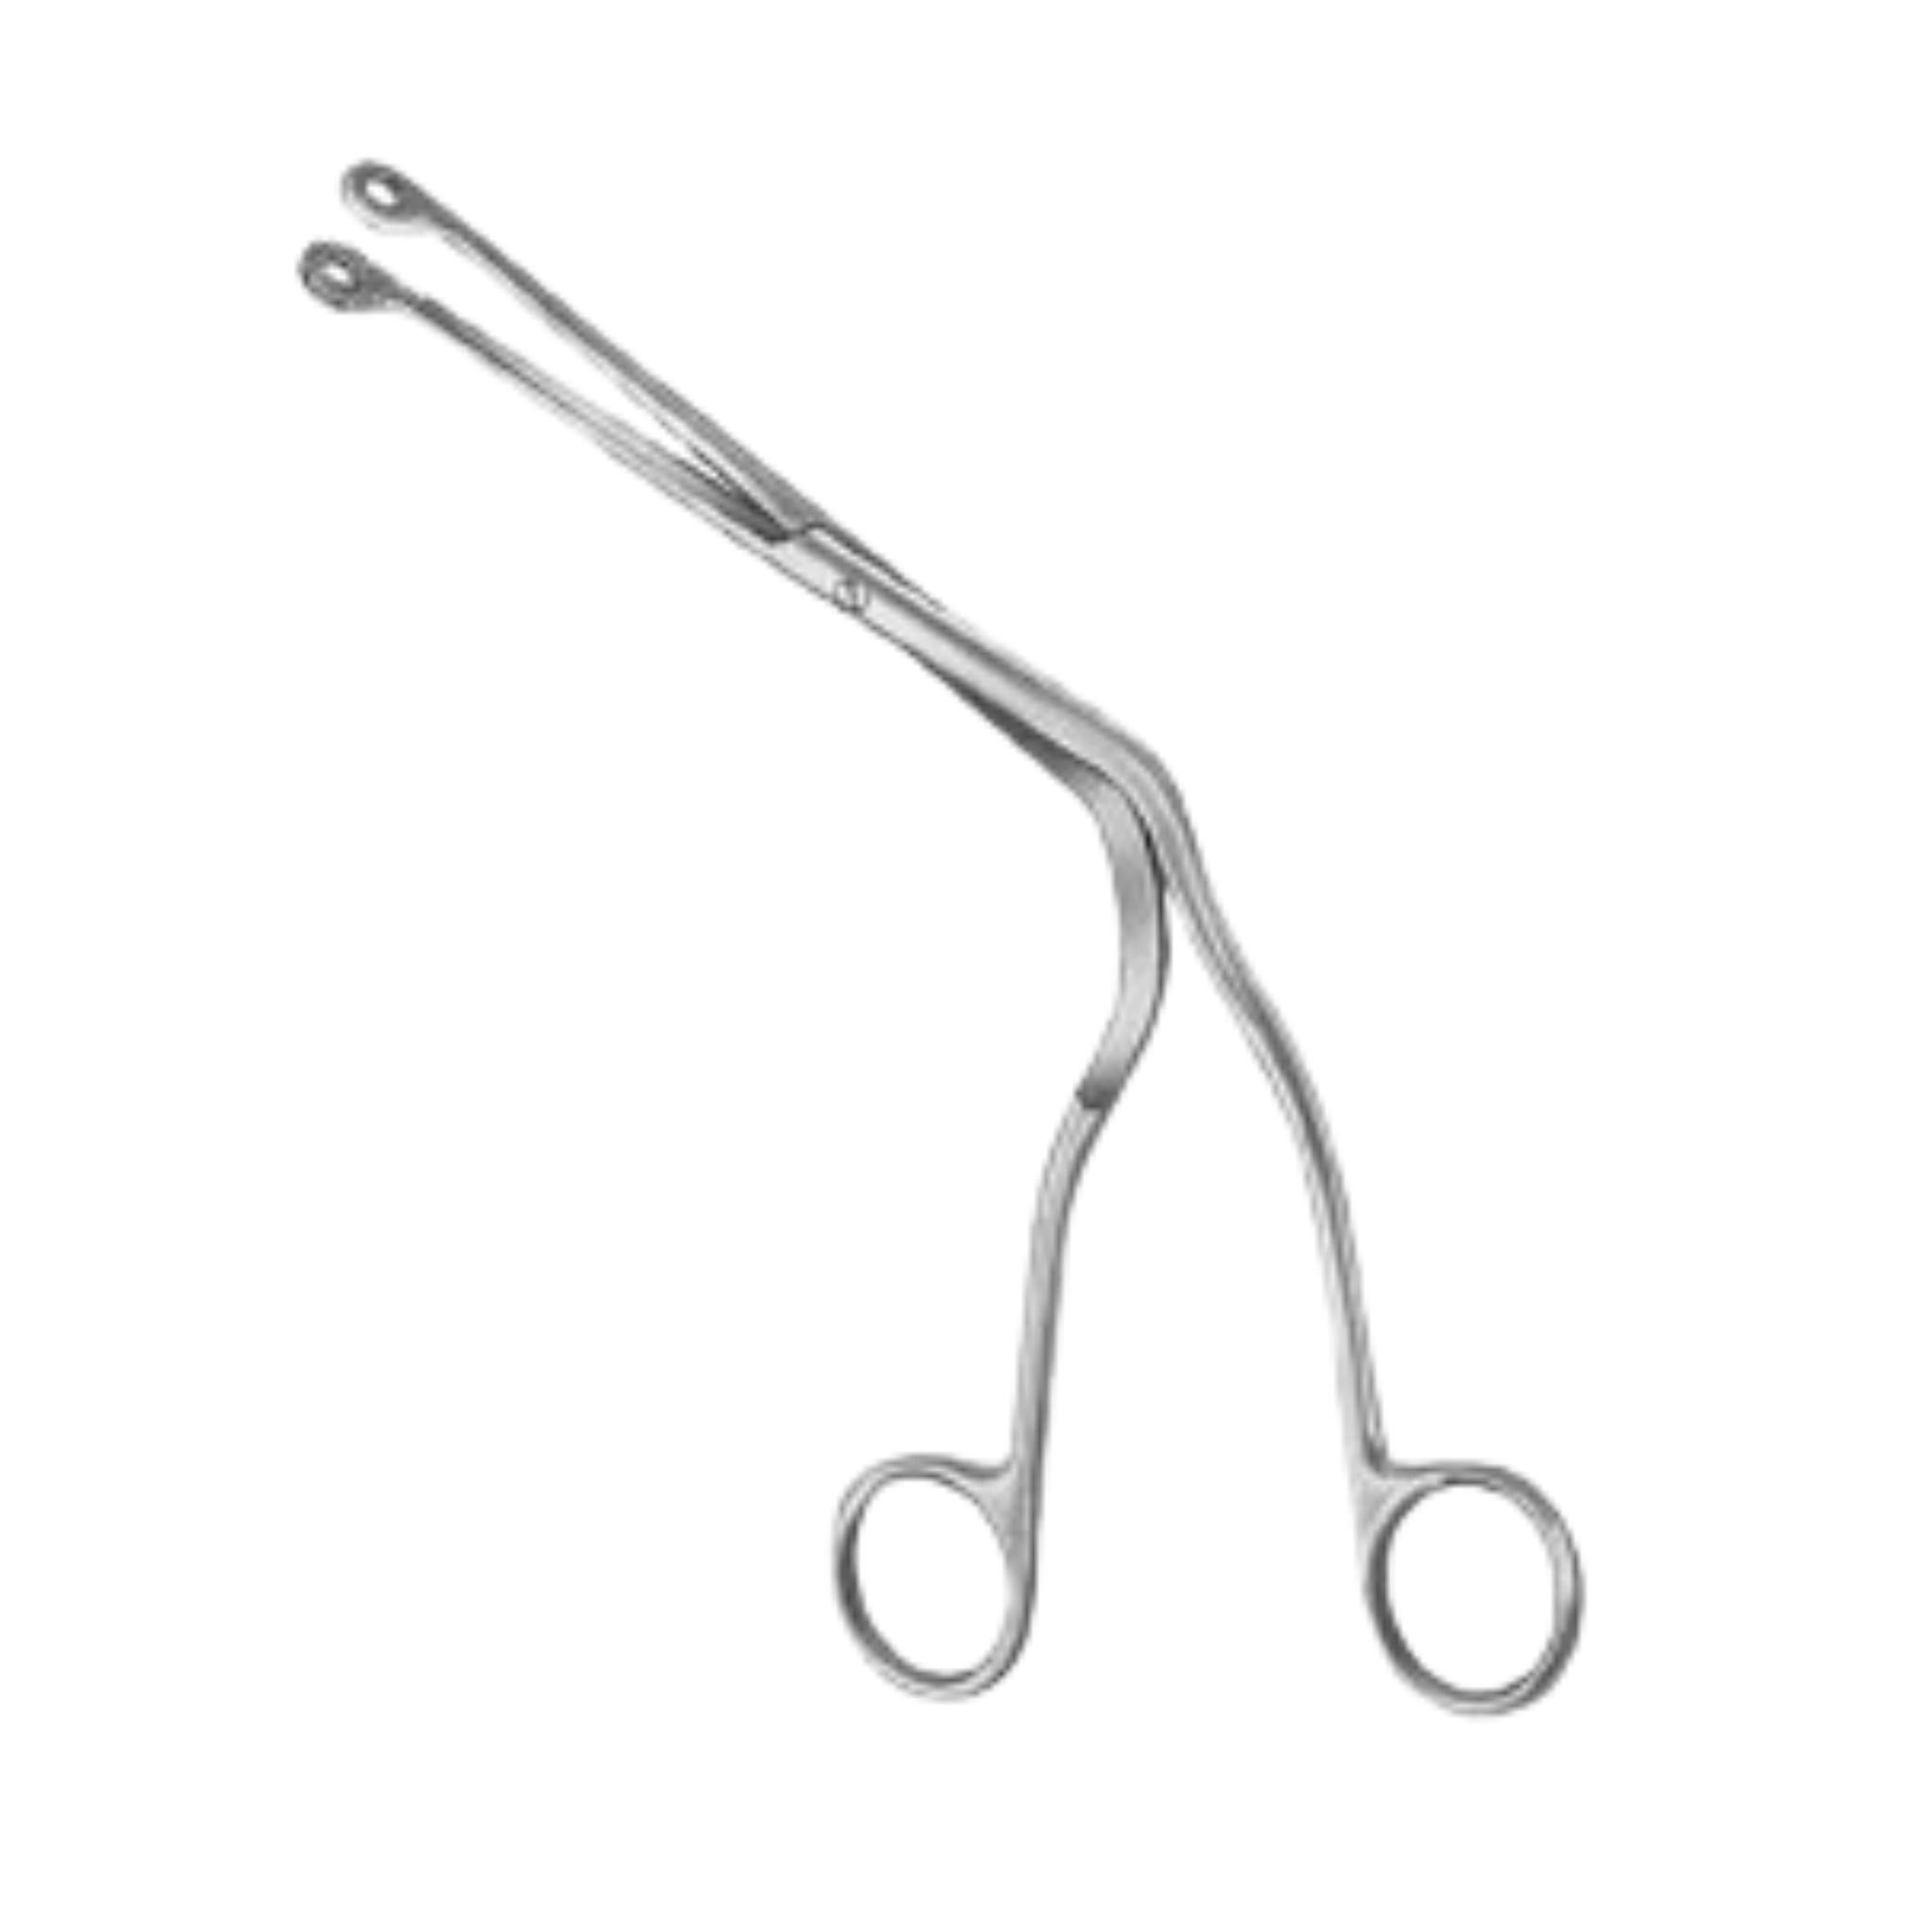 Magill Cathether Introducing Forceps- 20 cm